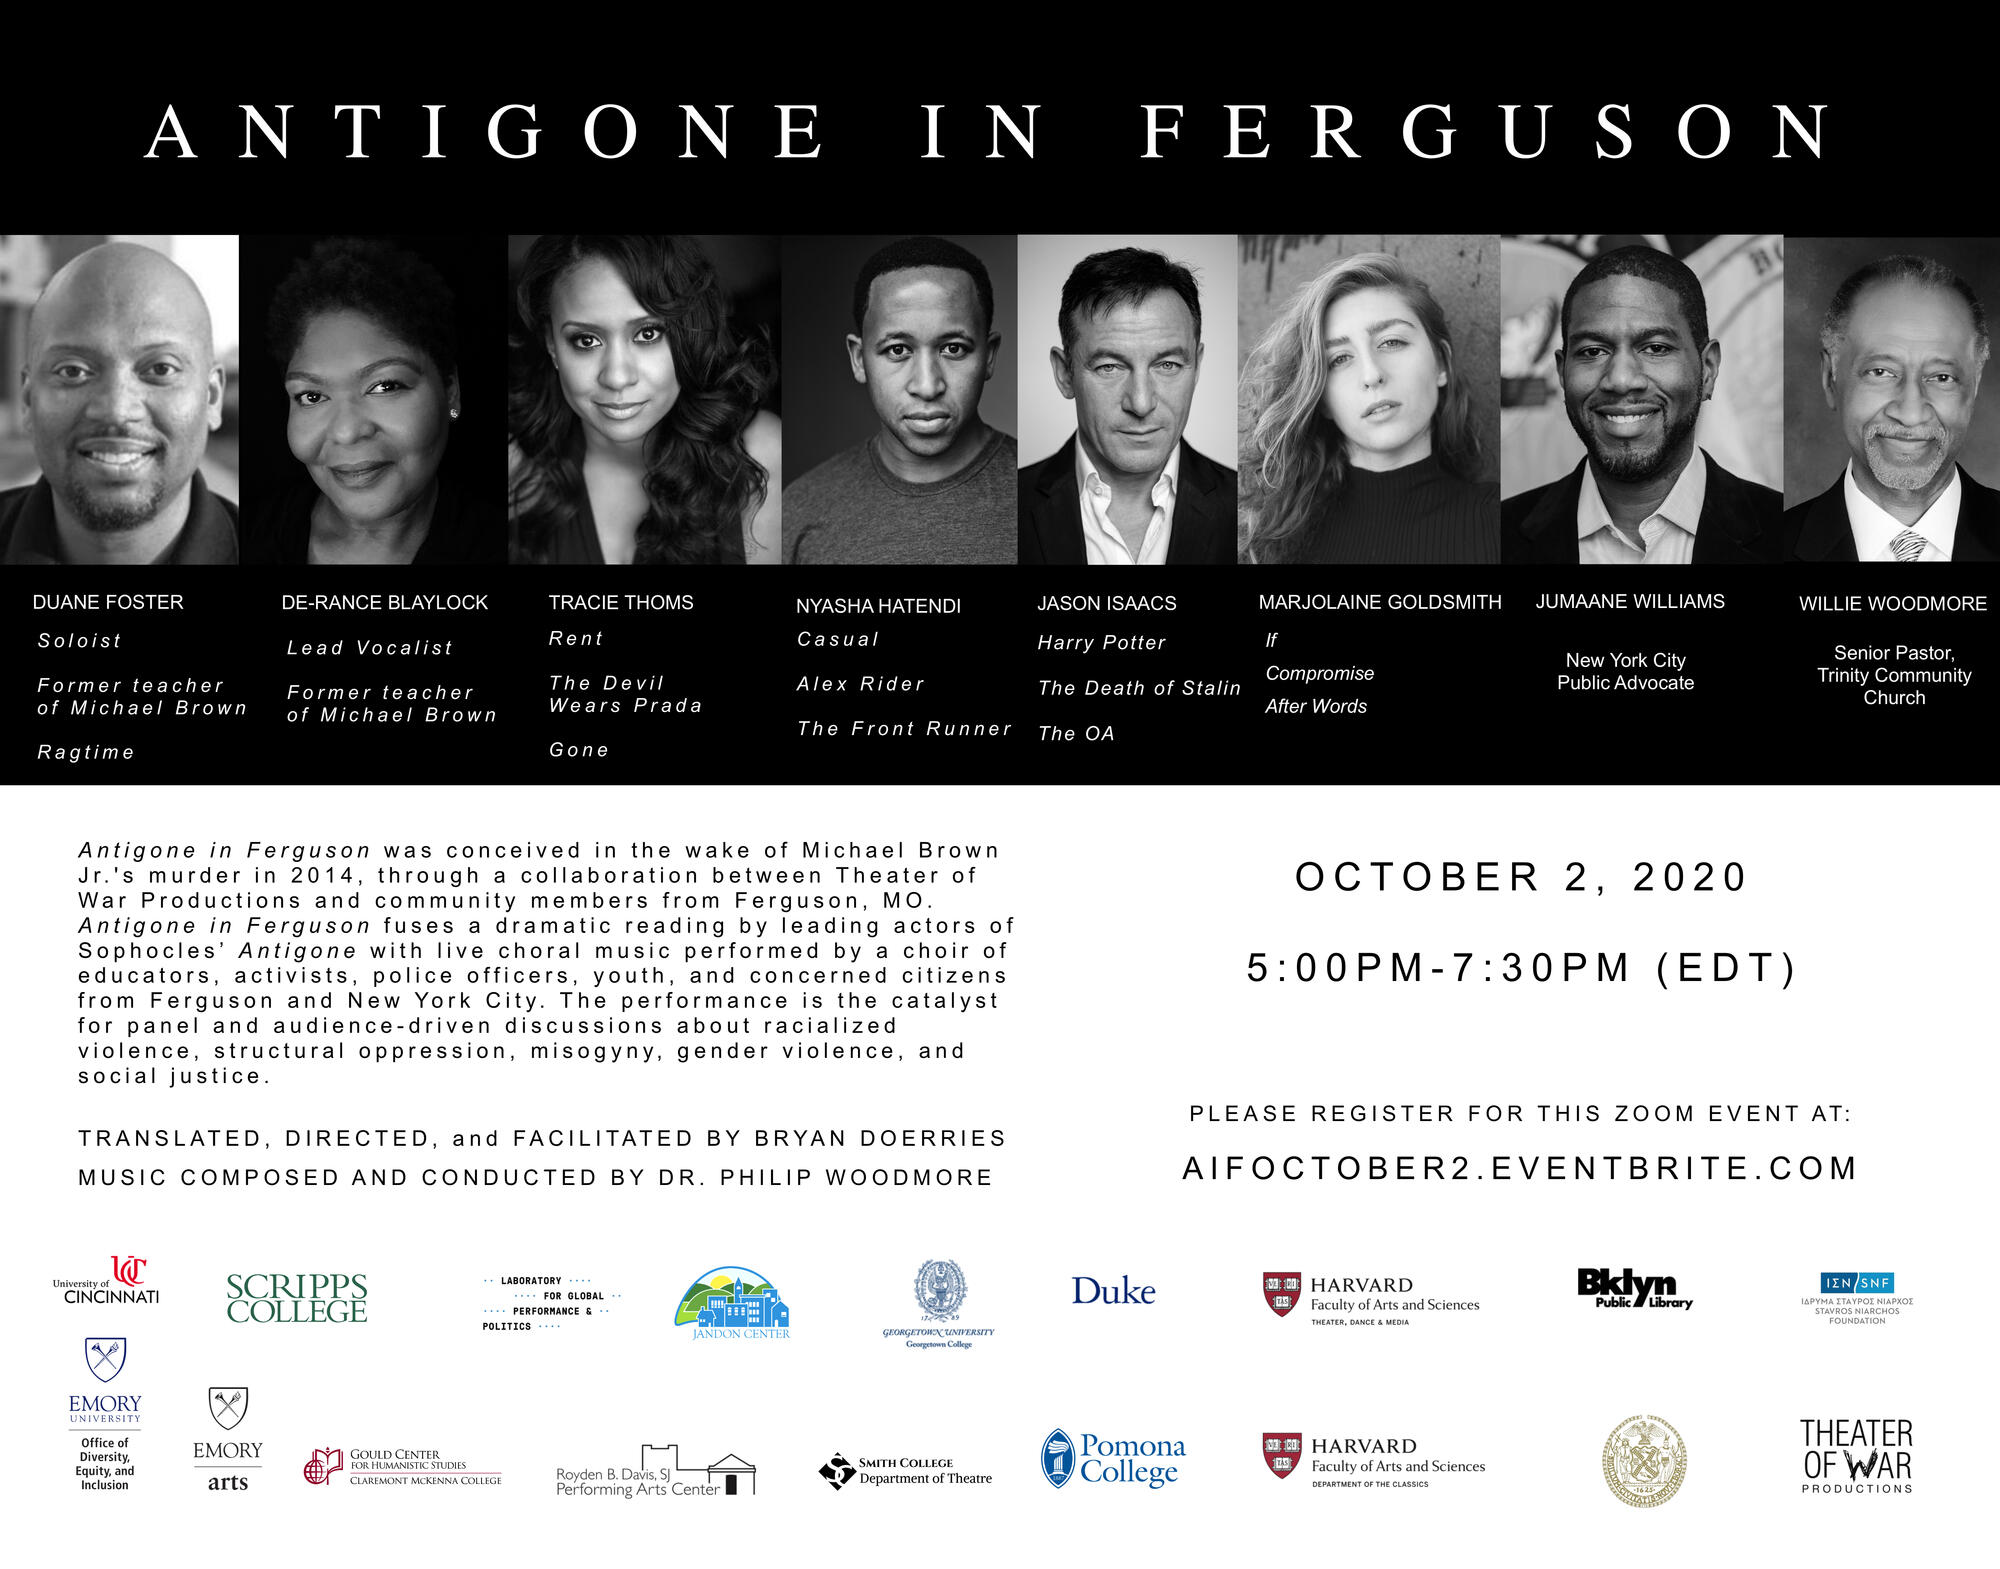 Cast members of Antigone in Ferguson are displayed at top with event info below